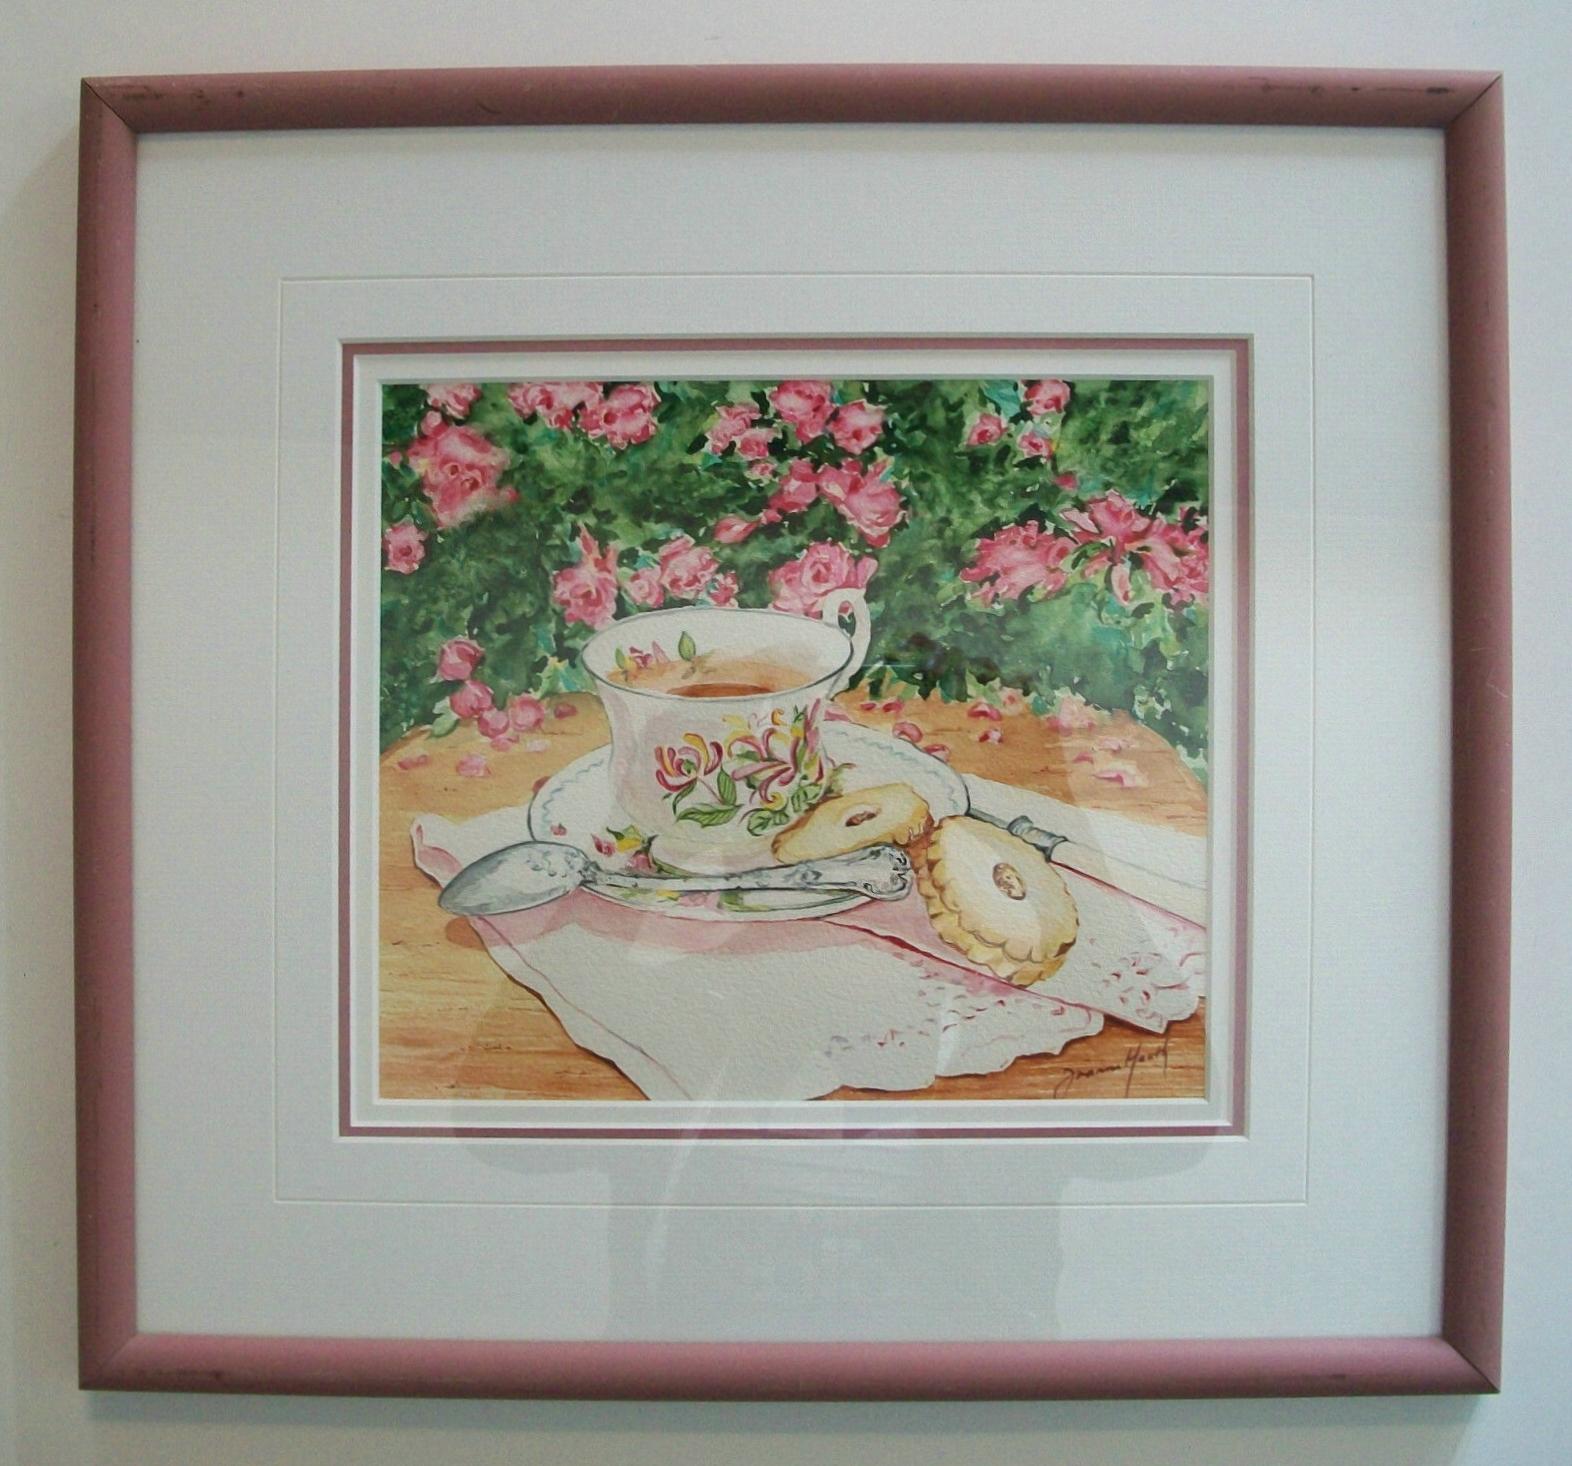 Joanne Heath-Menger- 'Afternoon Tea' - Vintage watercolor painting over graphite on paper - signed lower right - signed and titled verso - gallery/catalog number verso W/C 121-4 - finished with three bevel edged matte boards - matte finish gallery